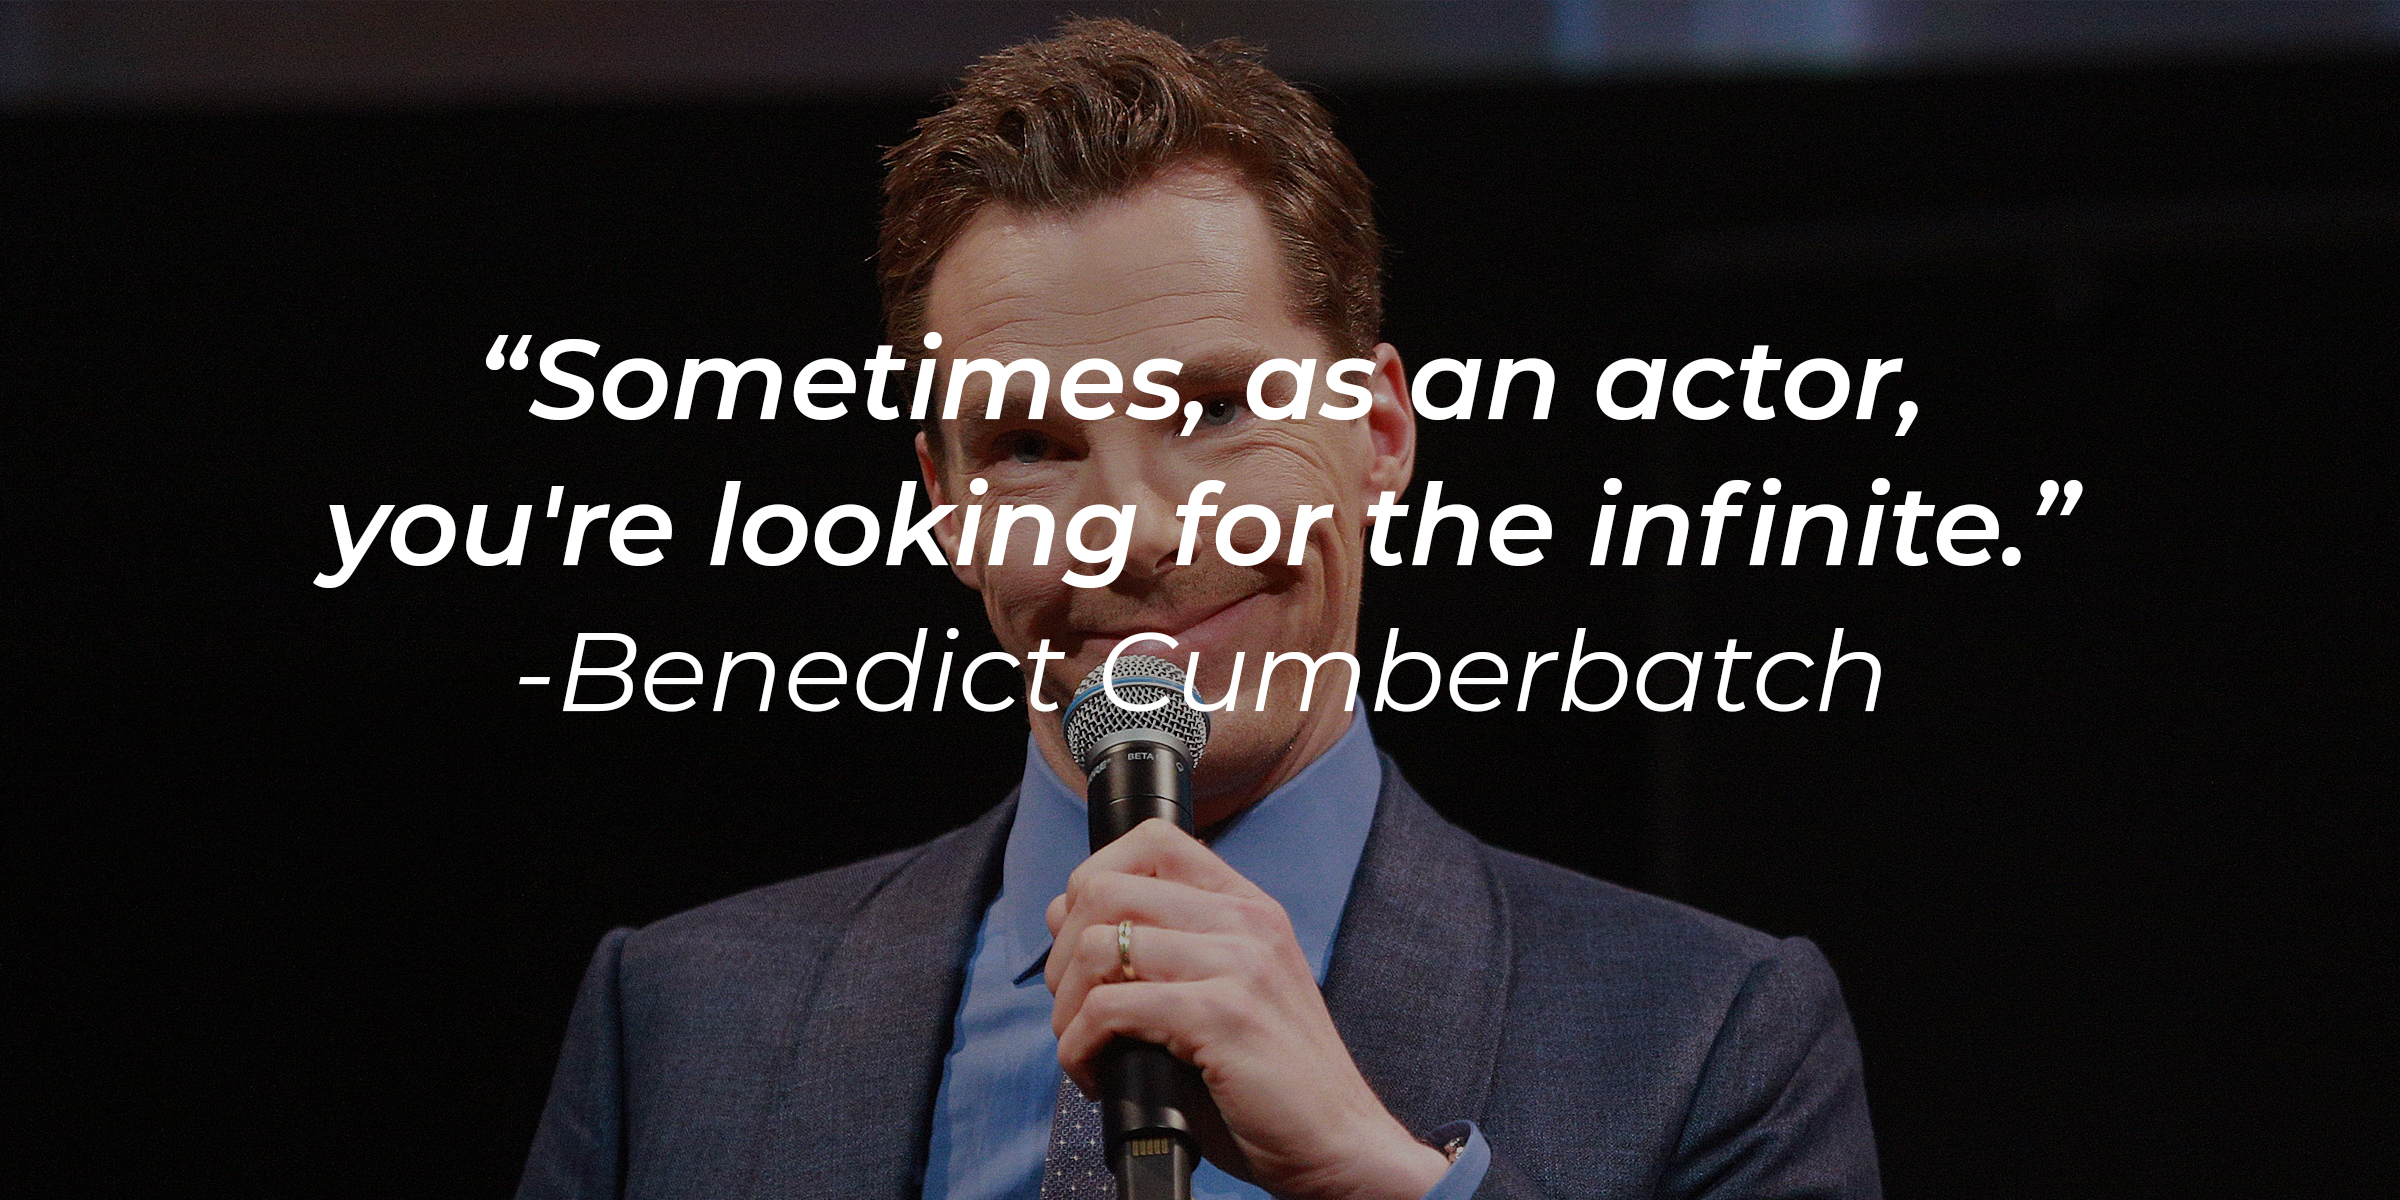 Benedict Cumberbatch with his quote: “Sometimes, as an actor, you're looking for the infinite.“ | Source: Getty Images